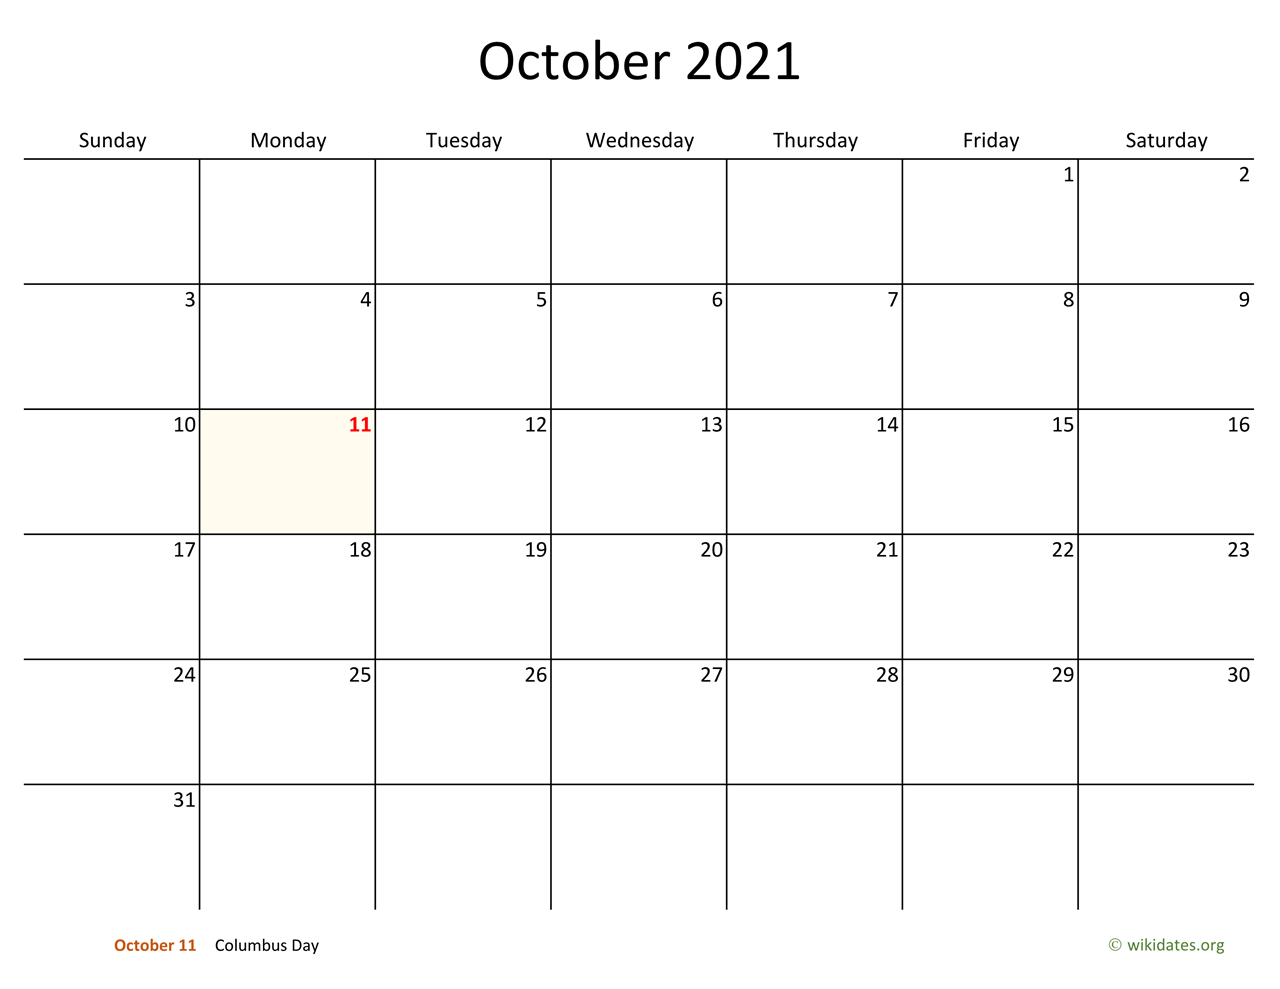 October 2021 Calendar With Bigger Boxes | Wikidates